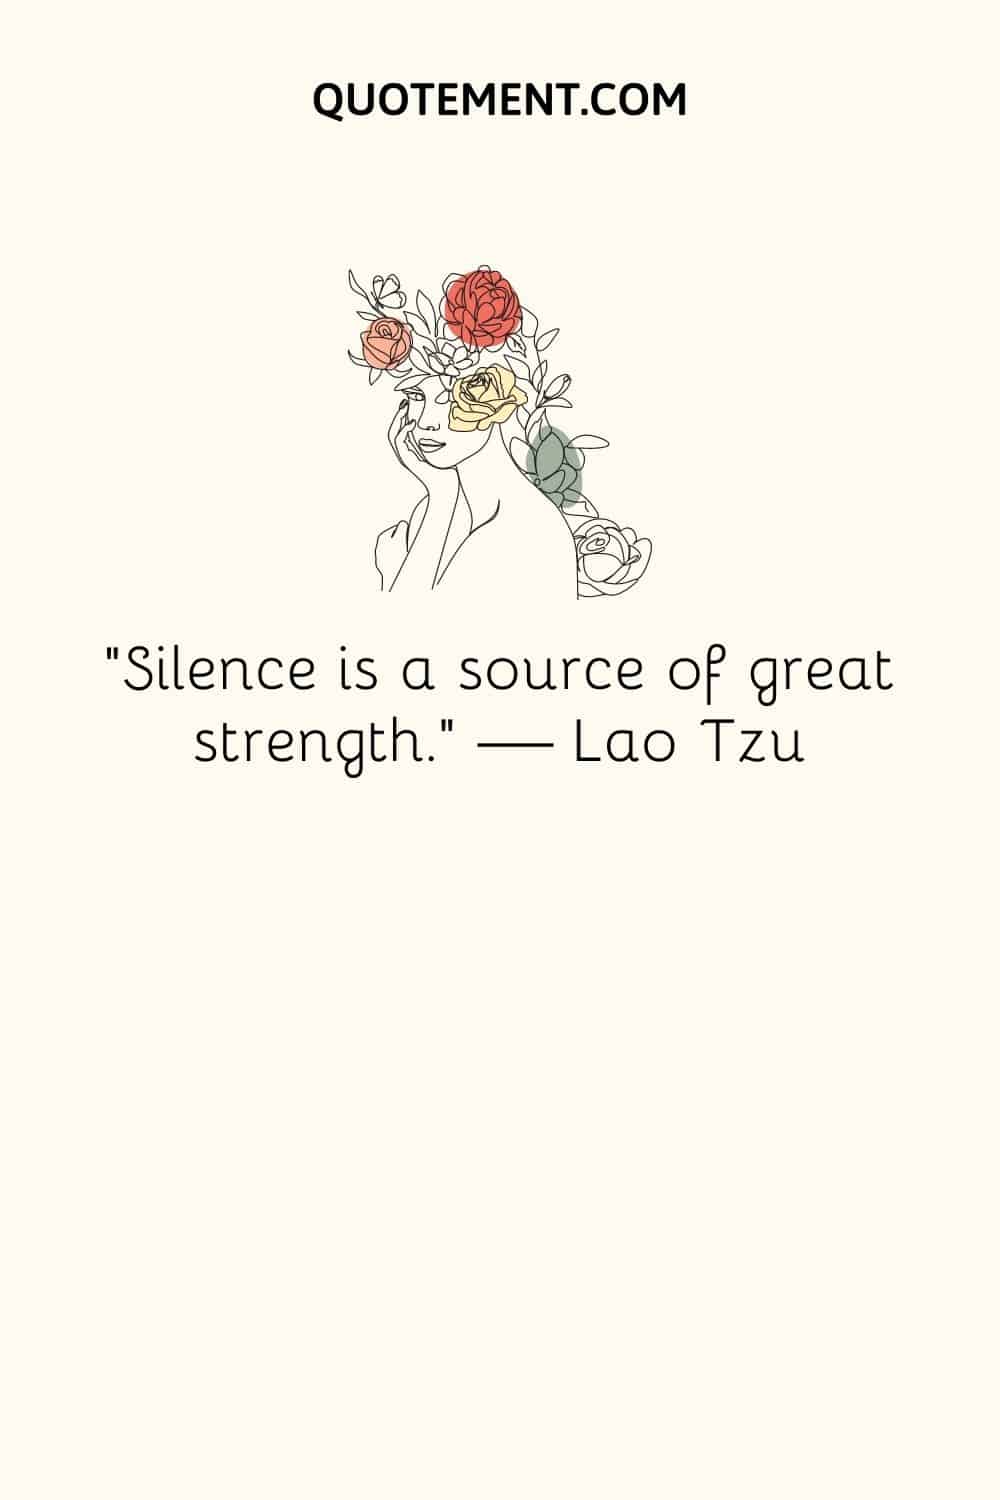 “Silence is a source of great strength.” ― Lao Tzu